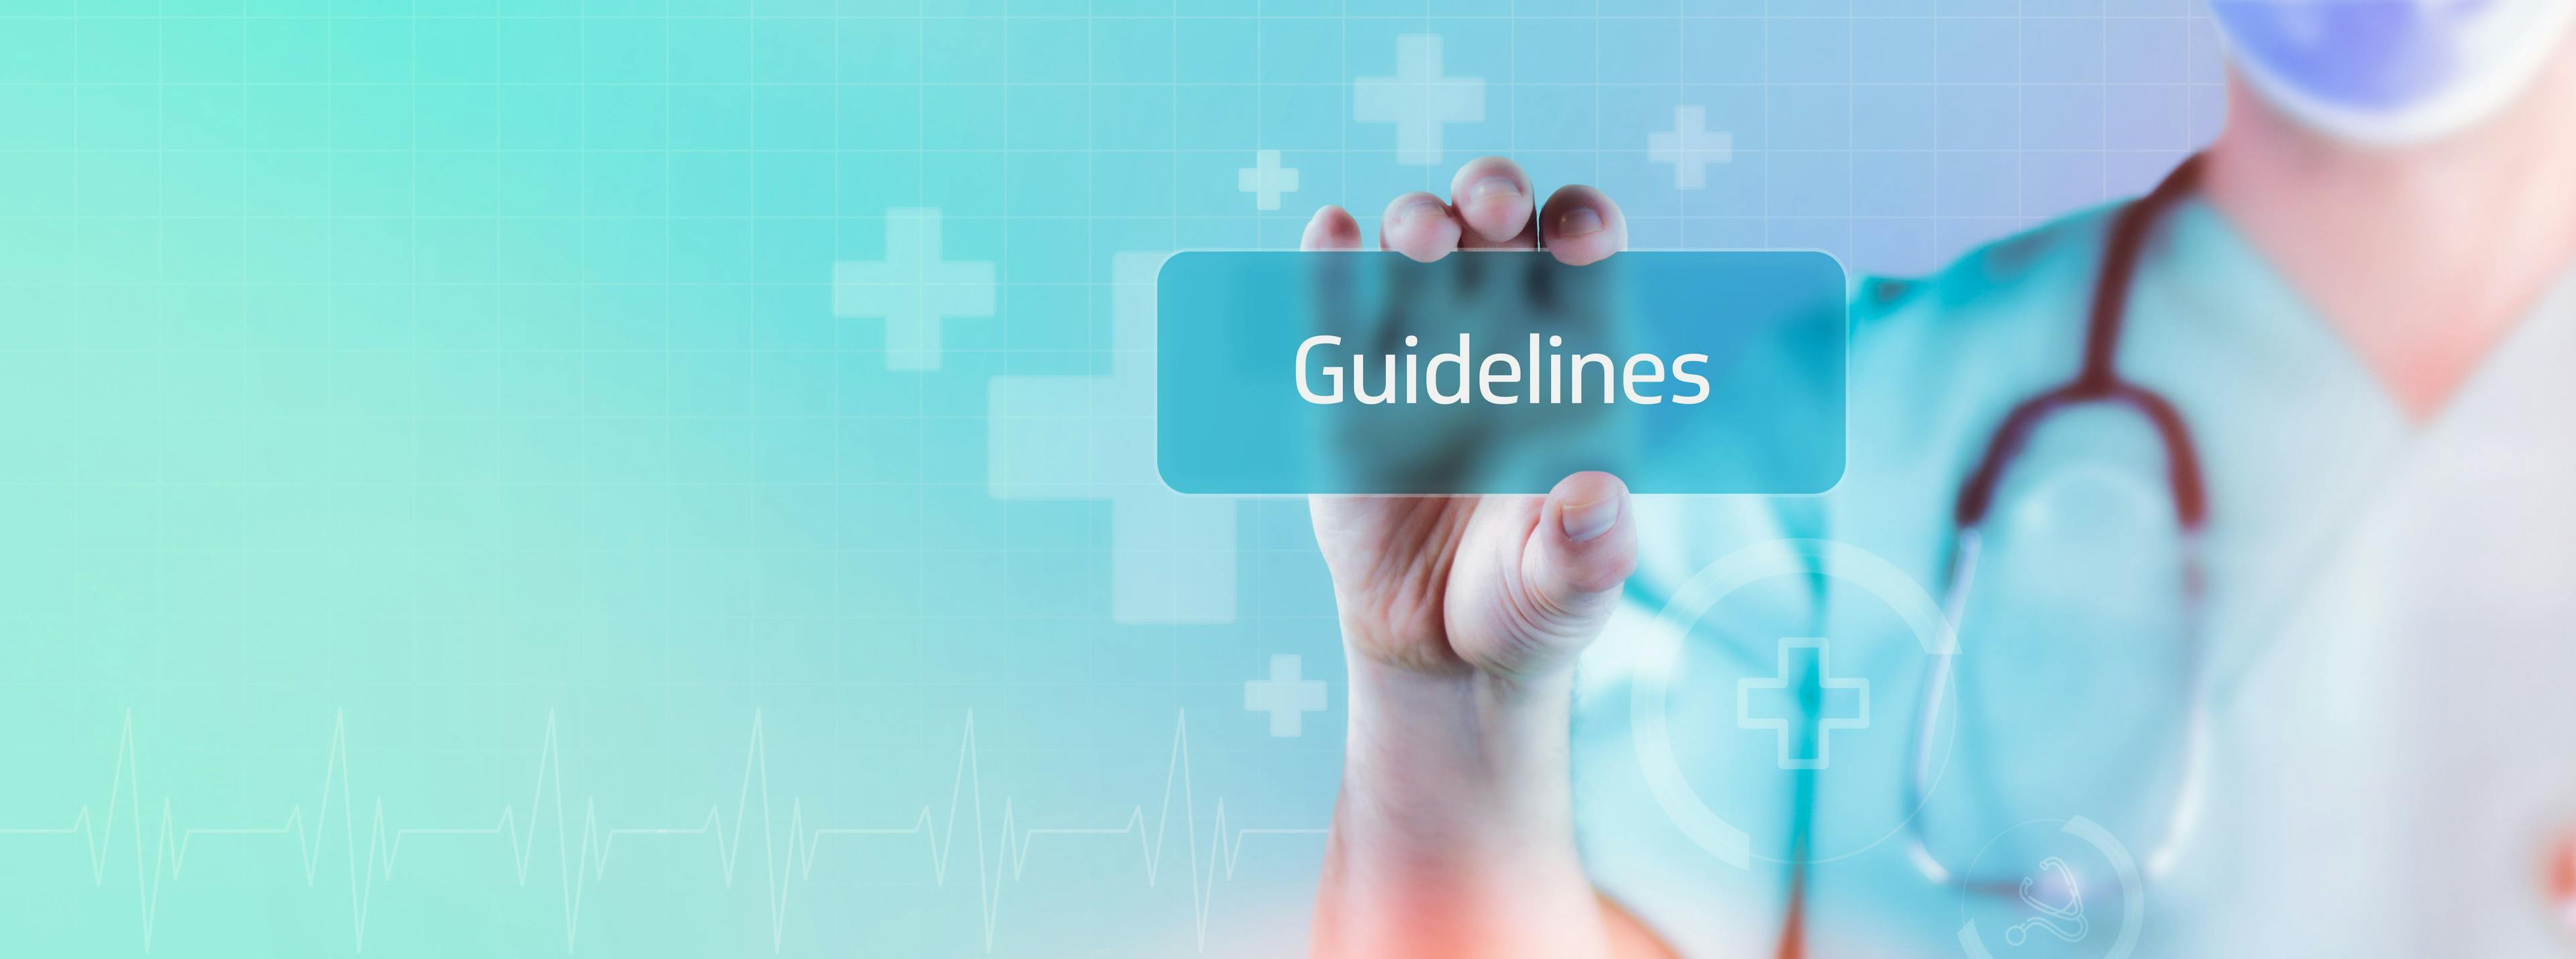 hand holding a sign that says guidelines | Image credit: MQ-Illustrations  stock.adobe.com